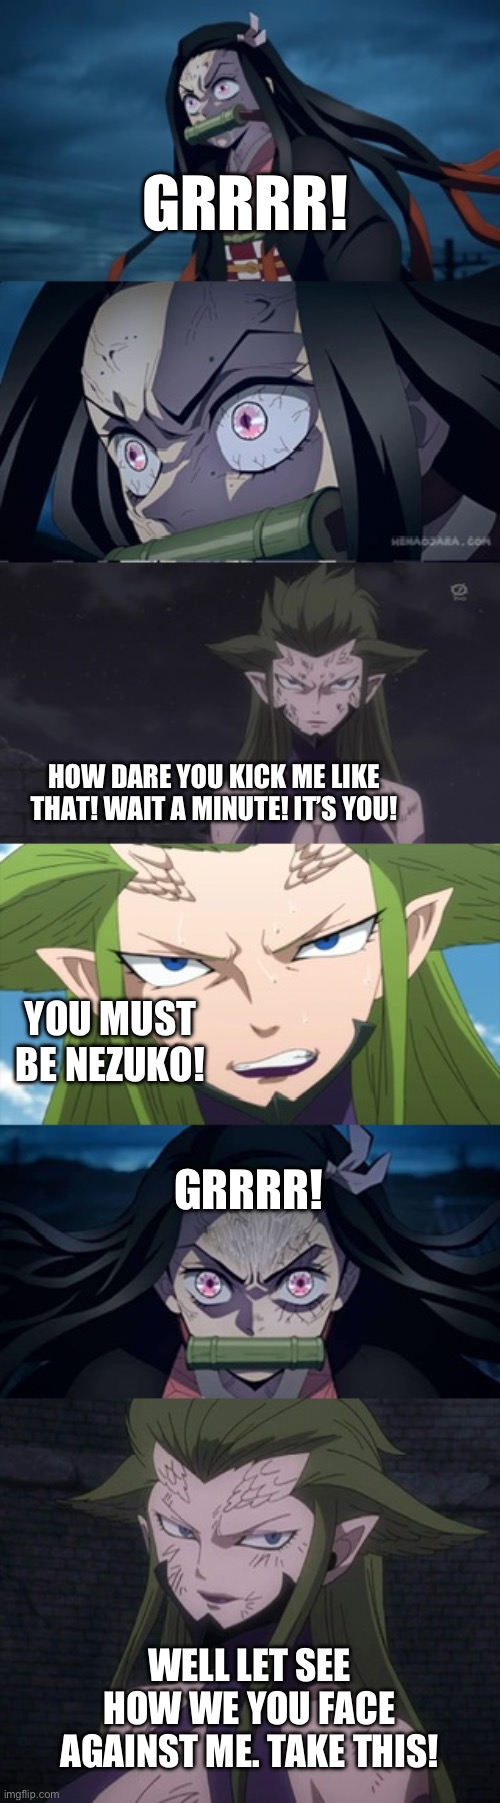 Kyoka vs Nezuko | GRRRR! HOW DARE YOU KICK ME LIKE THAT! WAIT A MINUTE! IT’S YOU! YOU MUST BE NEZUKO! GRRRR! WELL LET SEE HOW WE YOU FACE AGAINST ME. TAKE THIS! | image tagged in anime | made w/ Imgflip meme maker